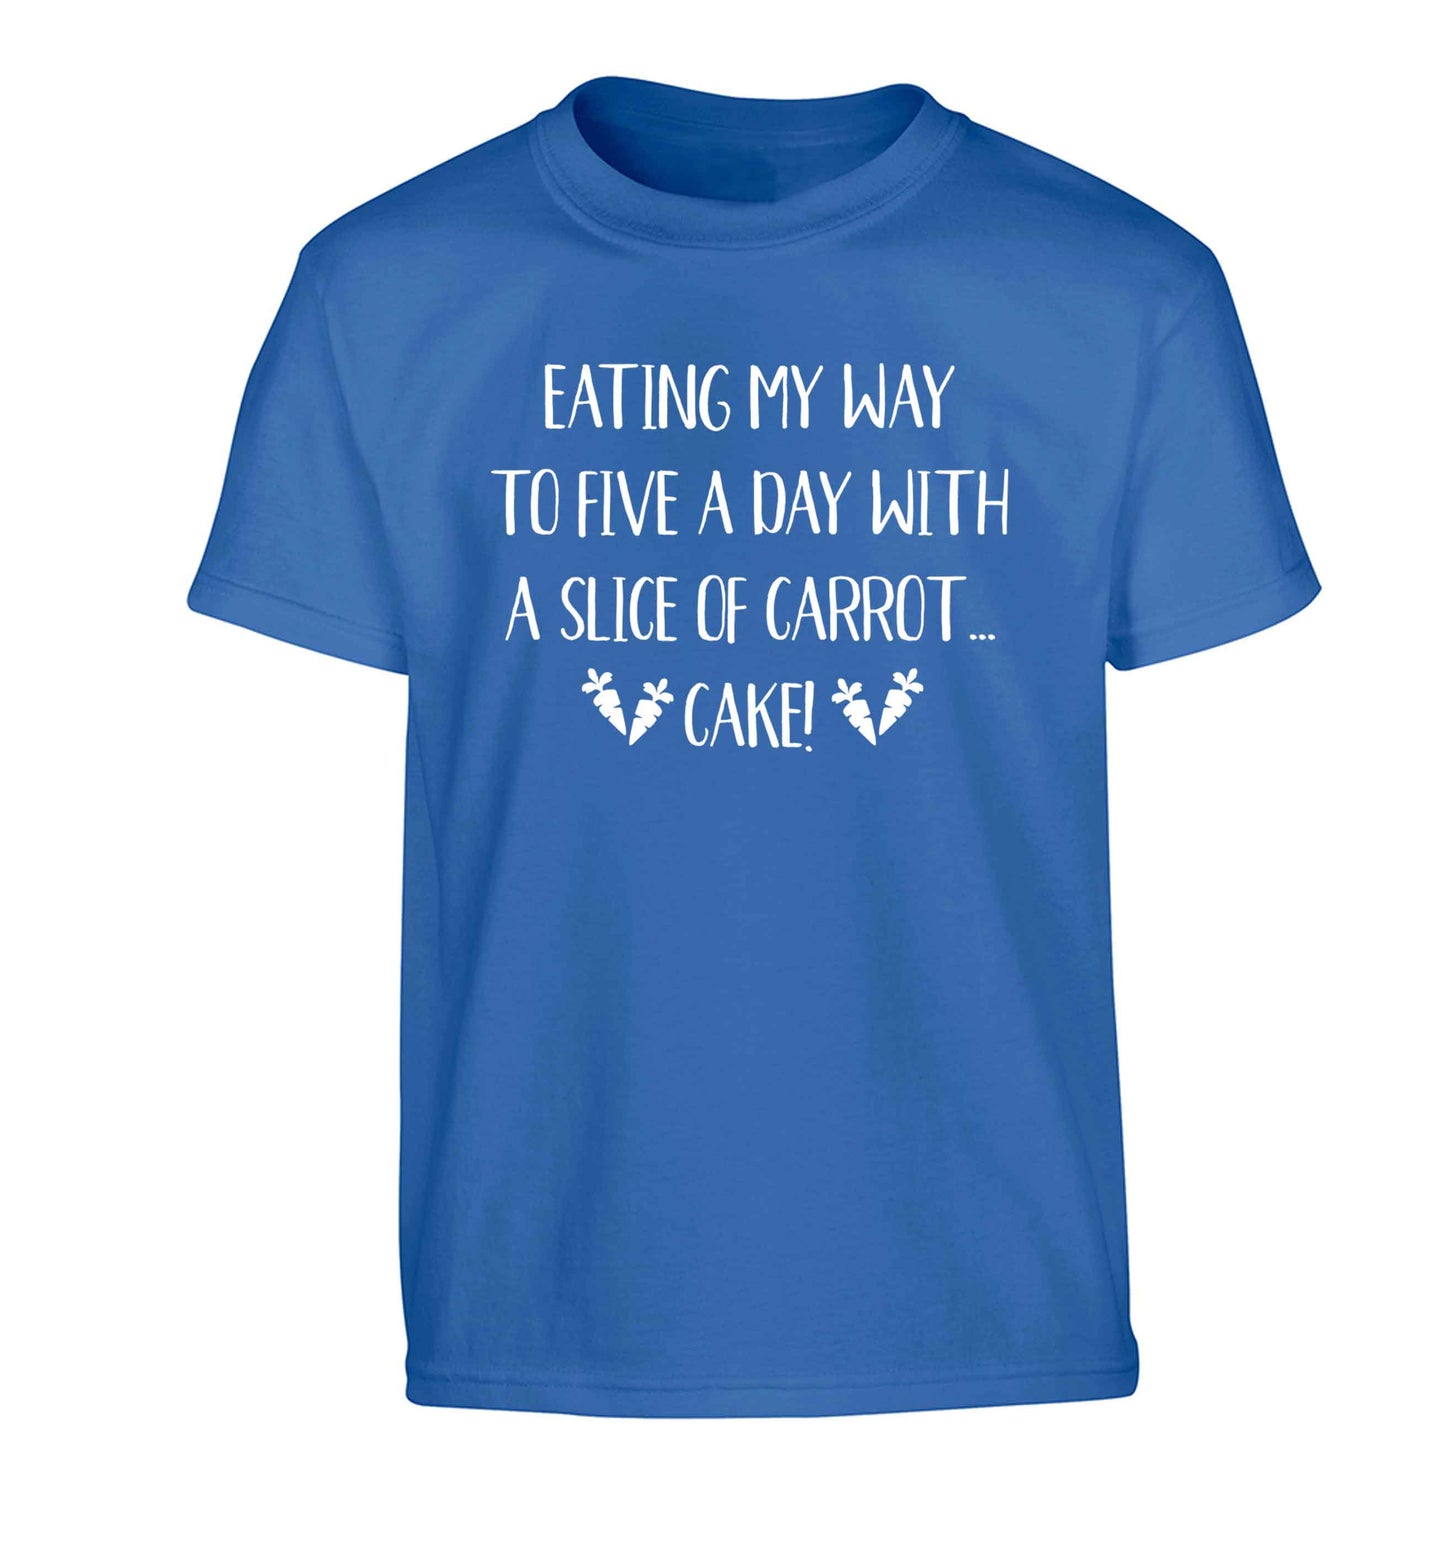 Eating my way to five a day with a slice of carrot cake day Children's blue Tshirt 12-13 Years